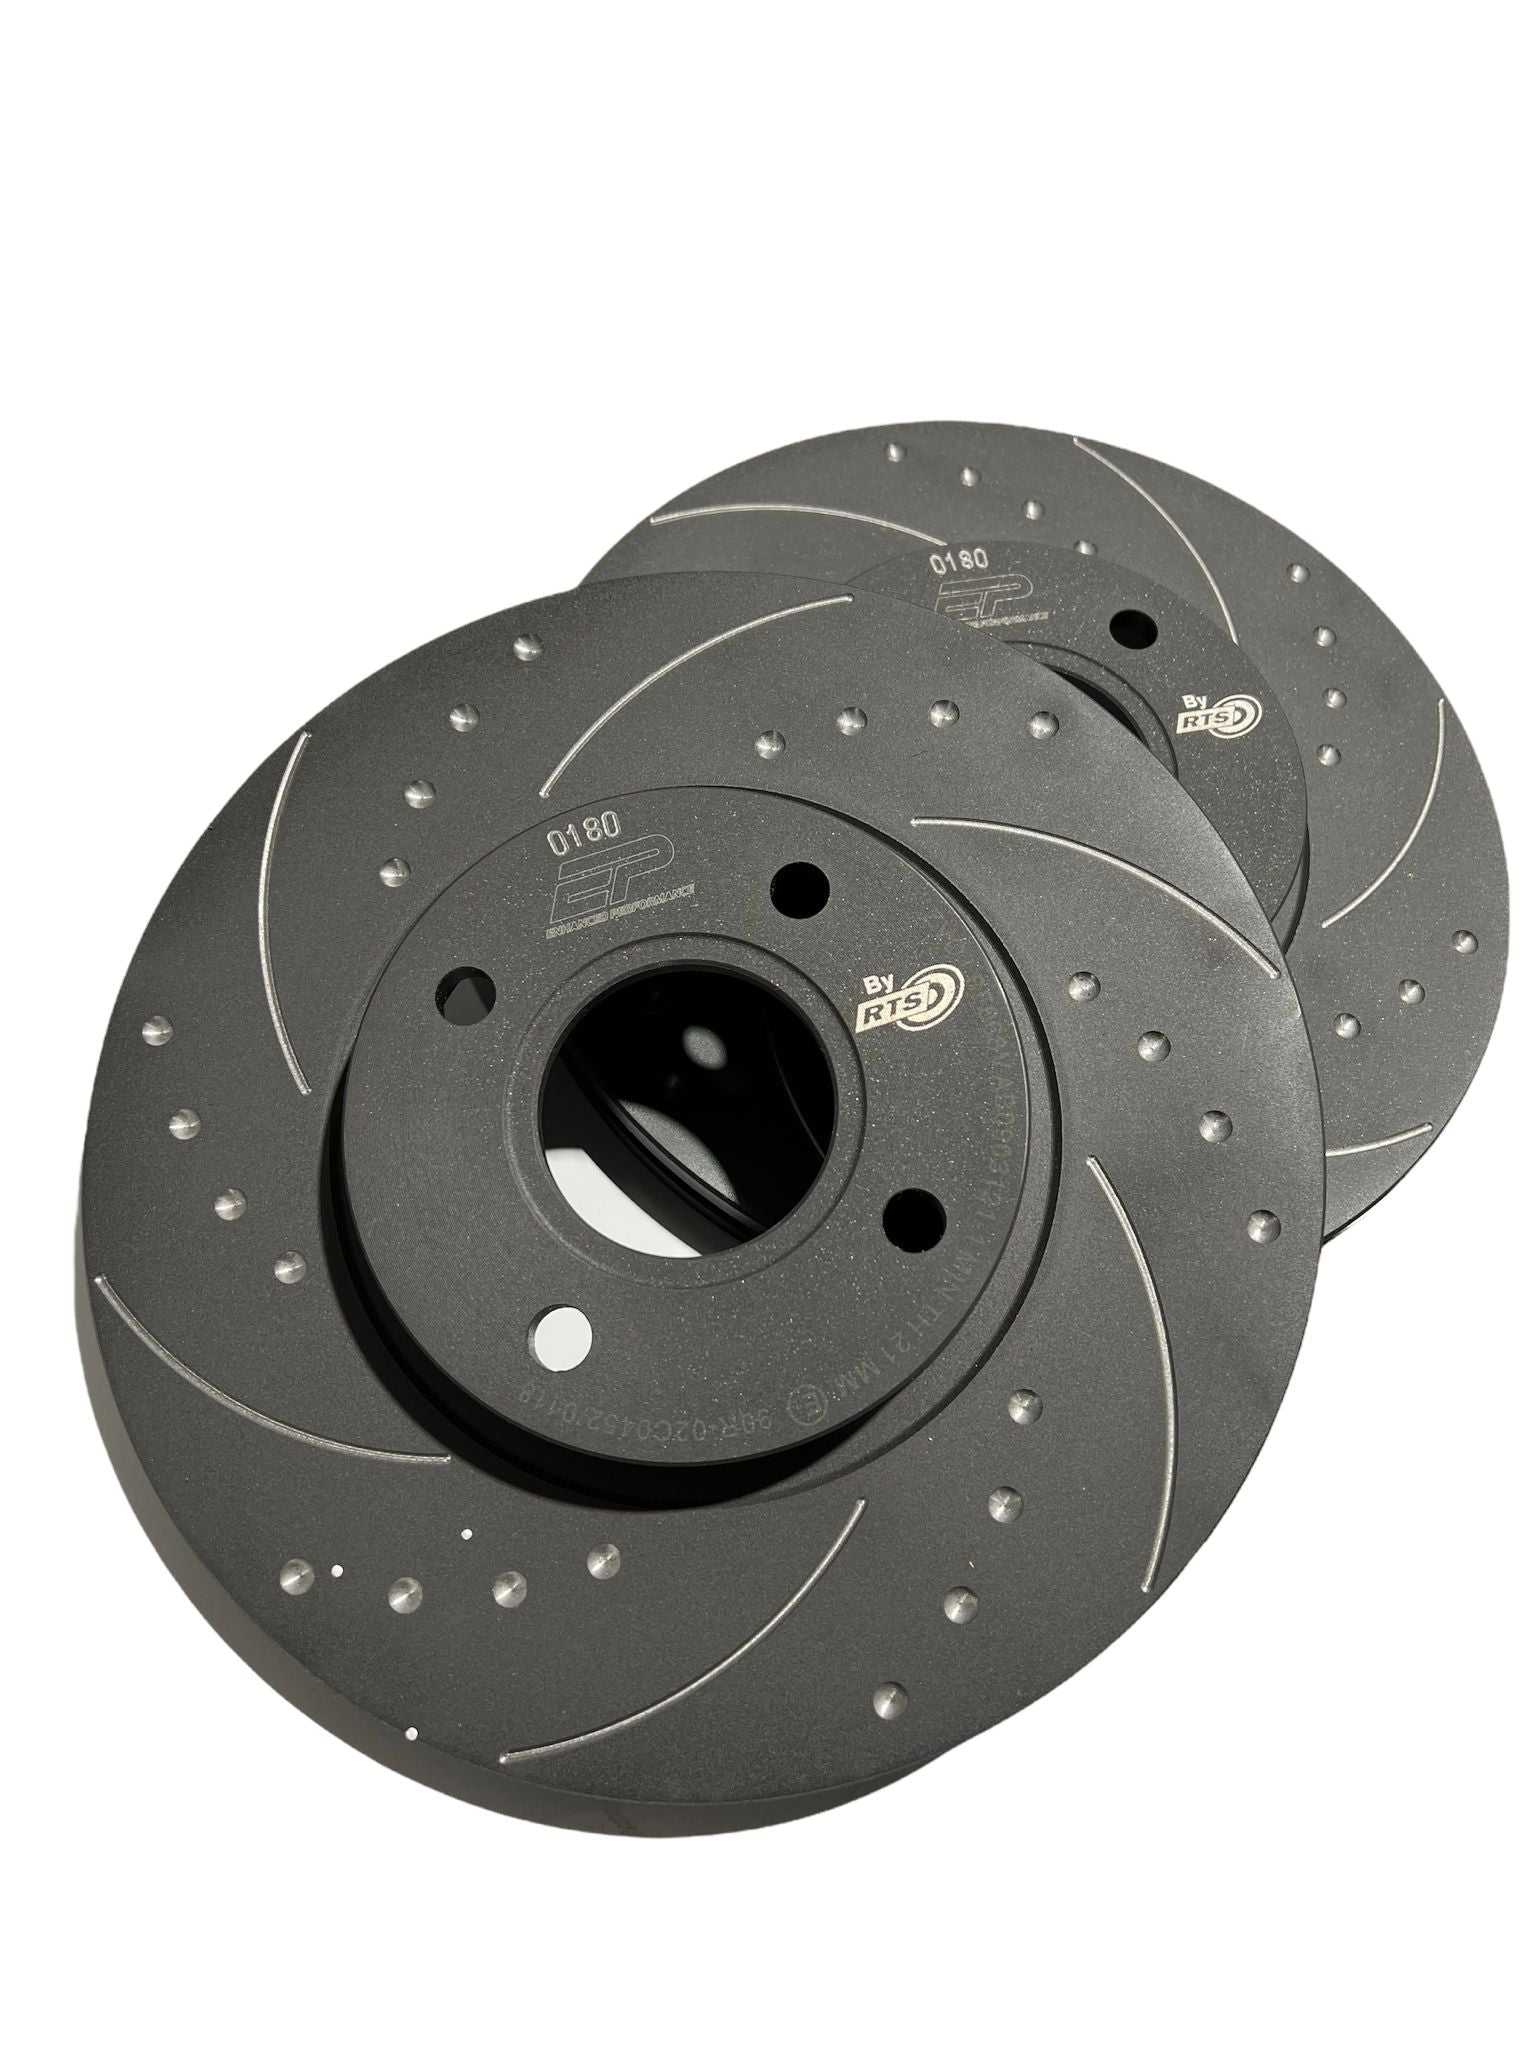 Enhanced Performance, Enhanced Performance (By RTS) Brake Disc Upgrade - MK6 Fiesta ST - Dimpled & Grooved